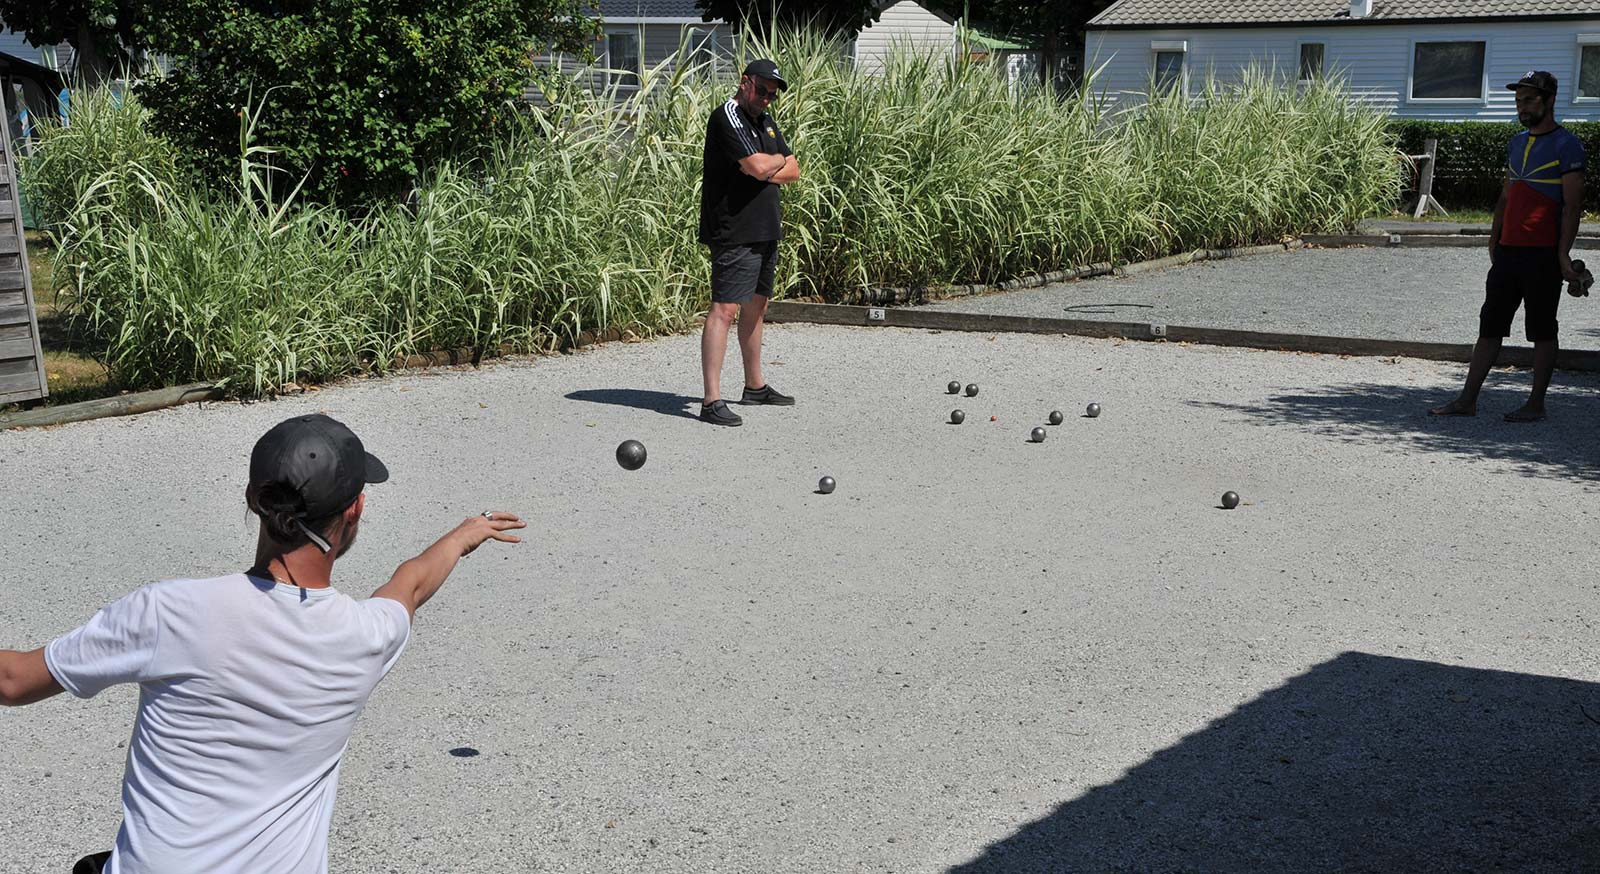 Pétanque players on the bowling alley at the campsite in Oléron